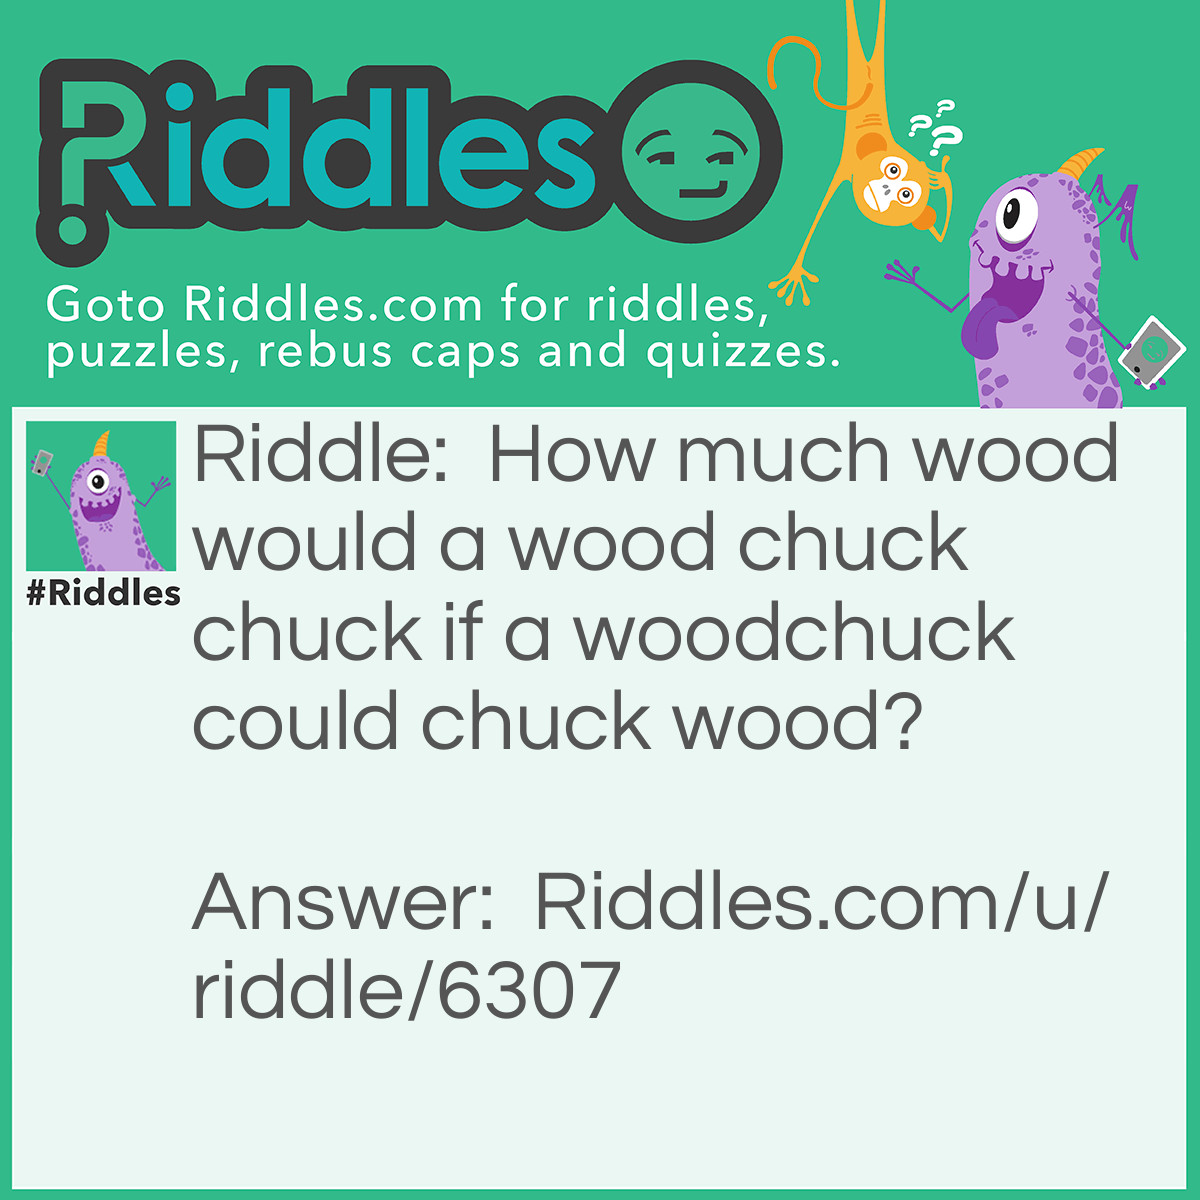 Riddle: How much wood would a wood chuck chuck if a woodchuck could chuck wood? Answer: About as many cookies as cookie monster would muster if cookie monster could muster cooking cookies.